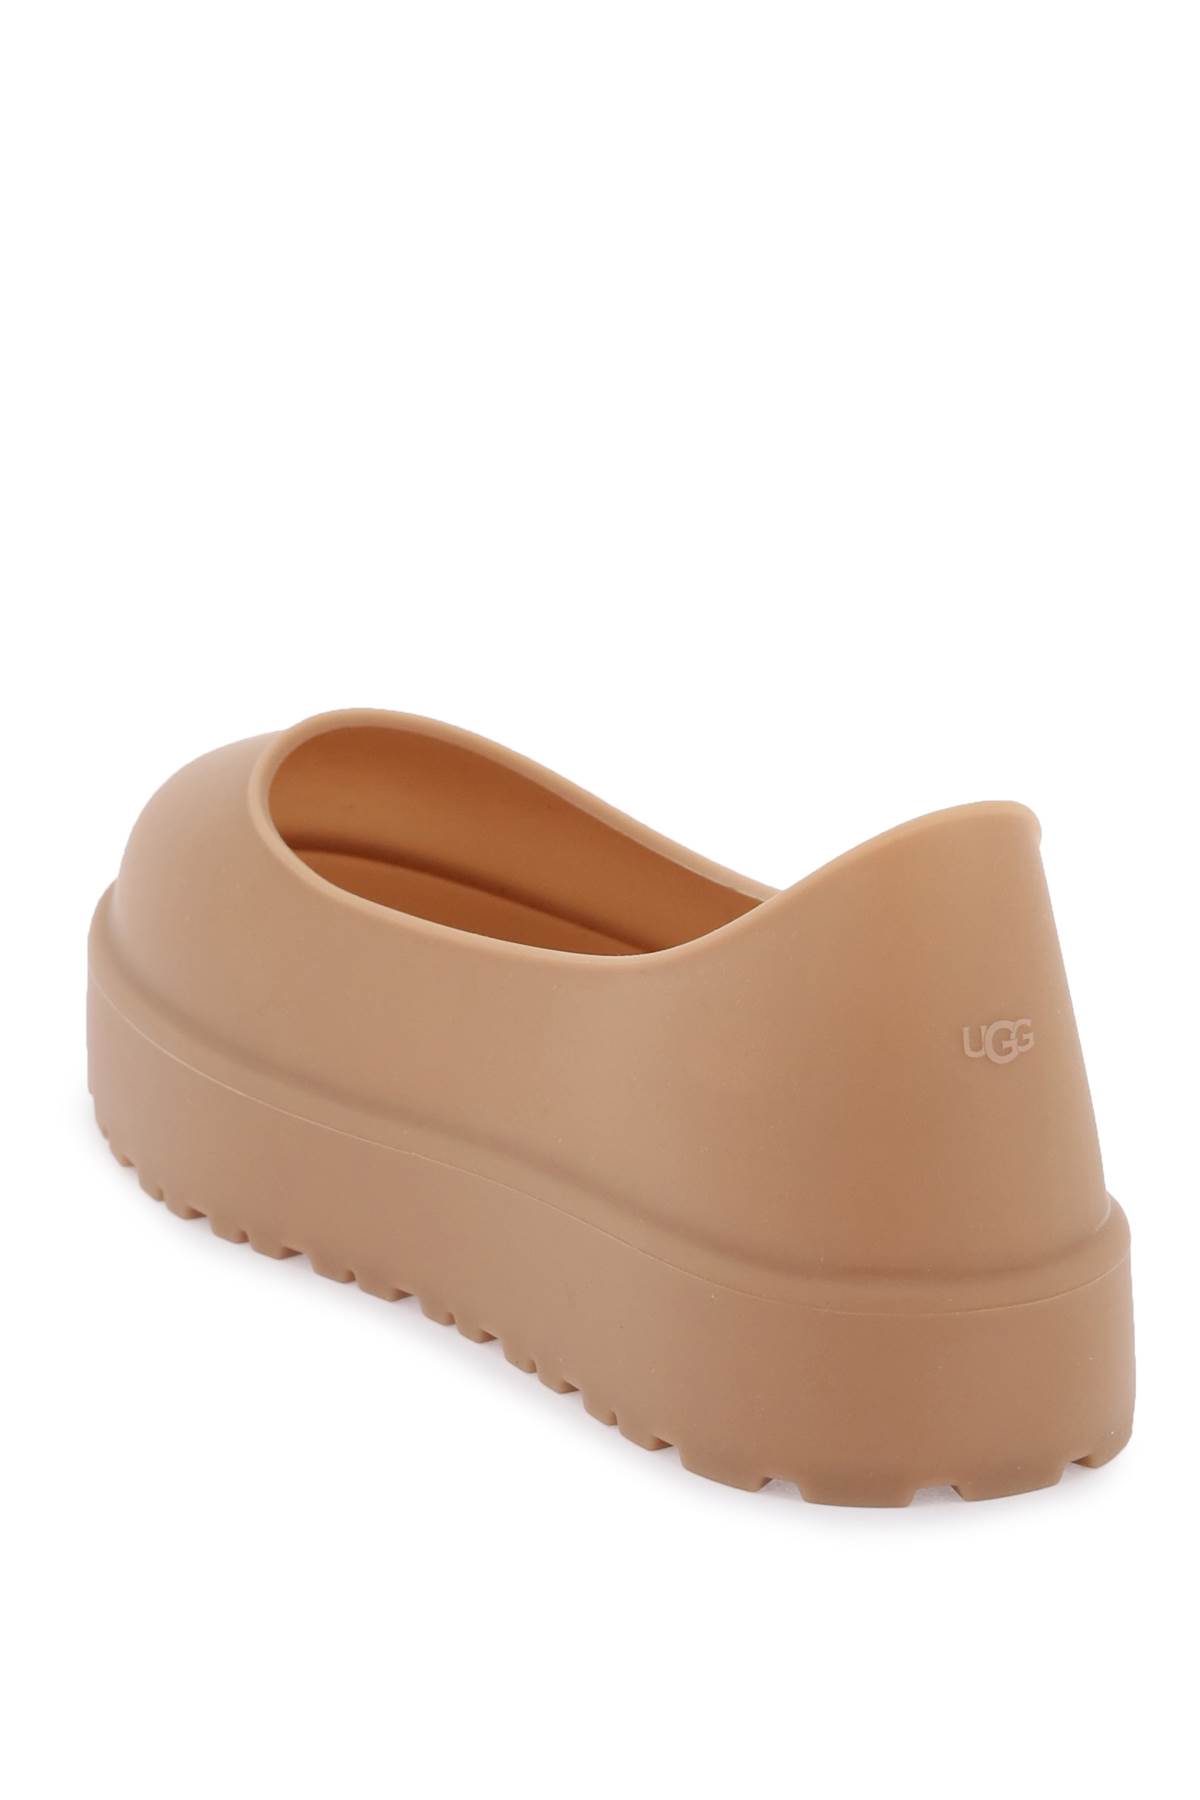 Shop Ugg Guard Shoe Protection In Chestnut (brown)